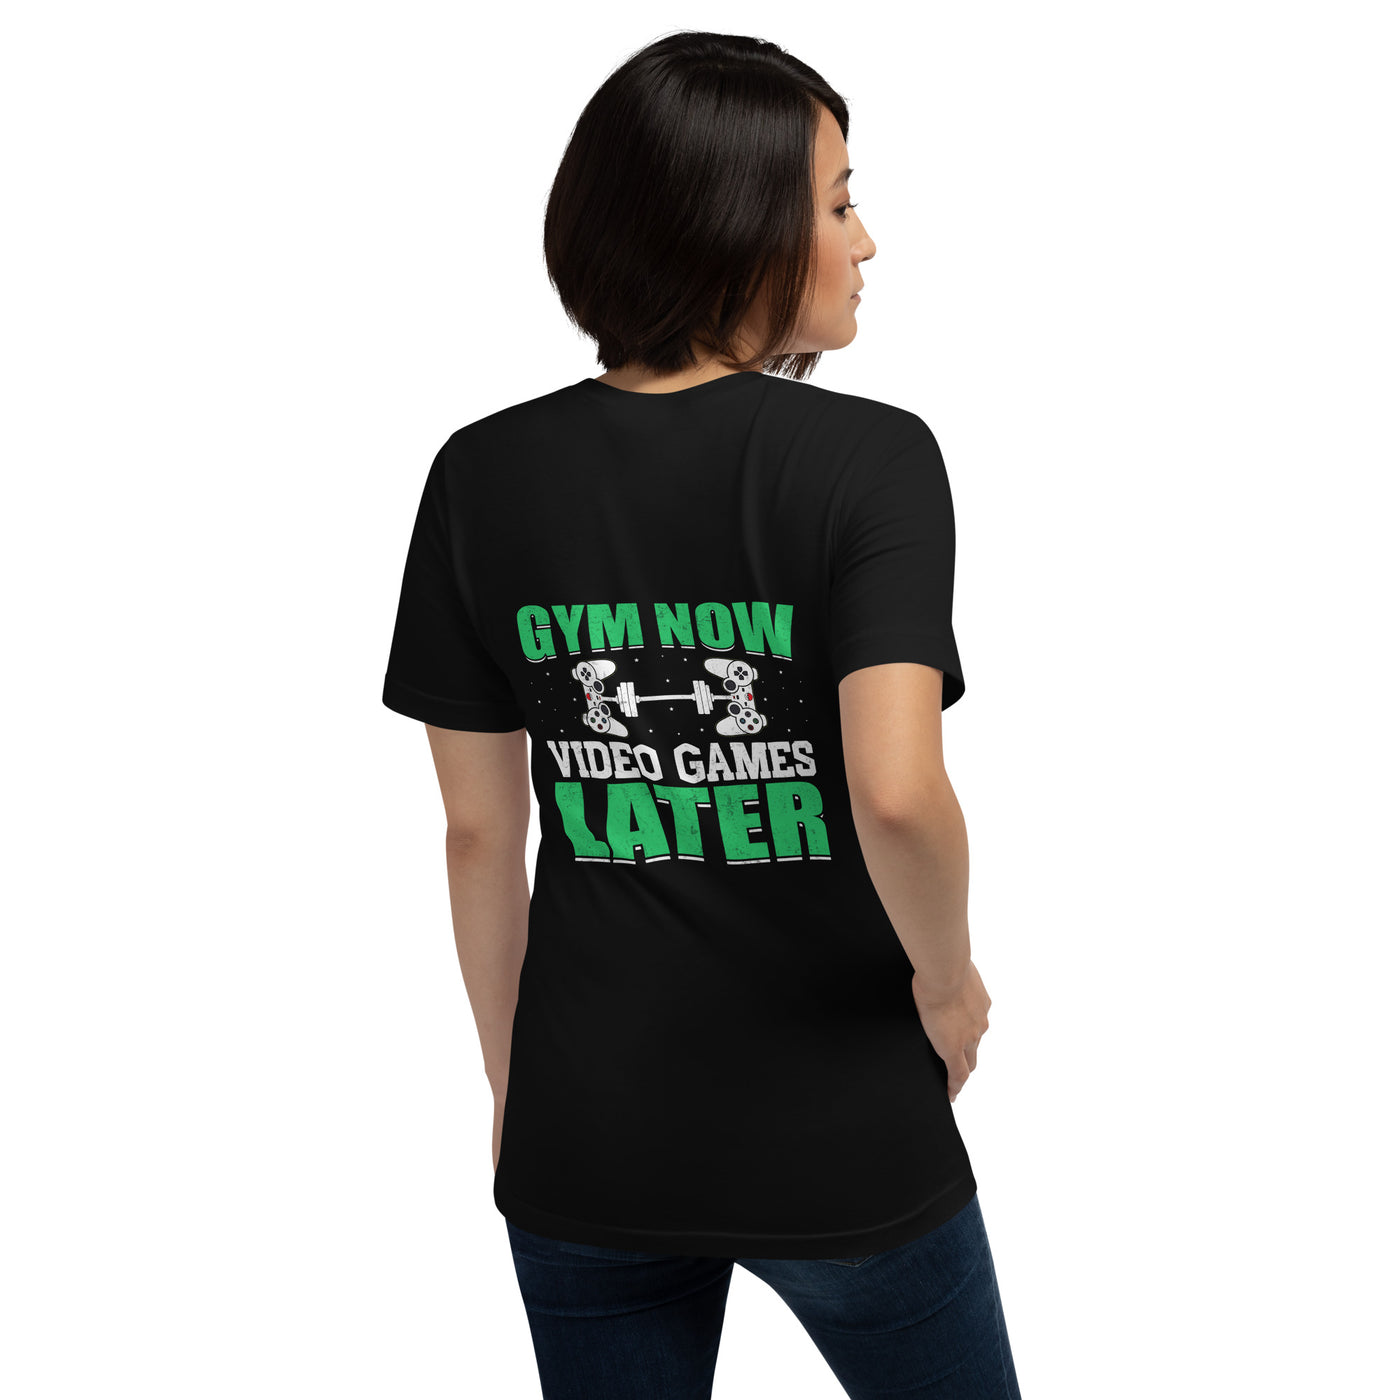 Gym now, Video Games Later - Unisex t-shirt